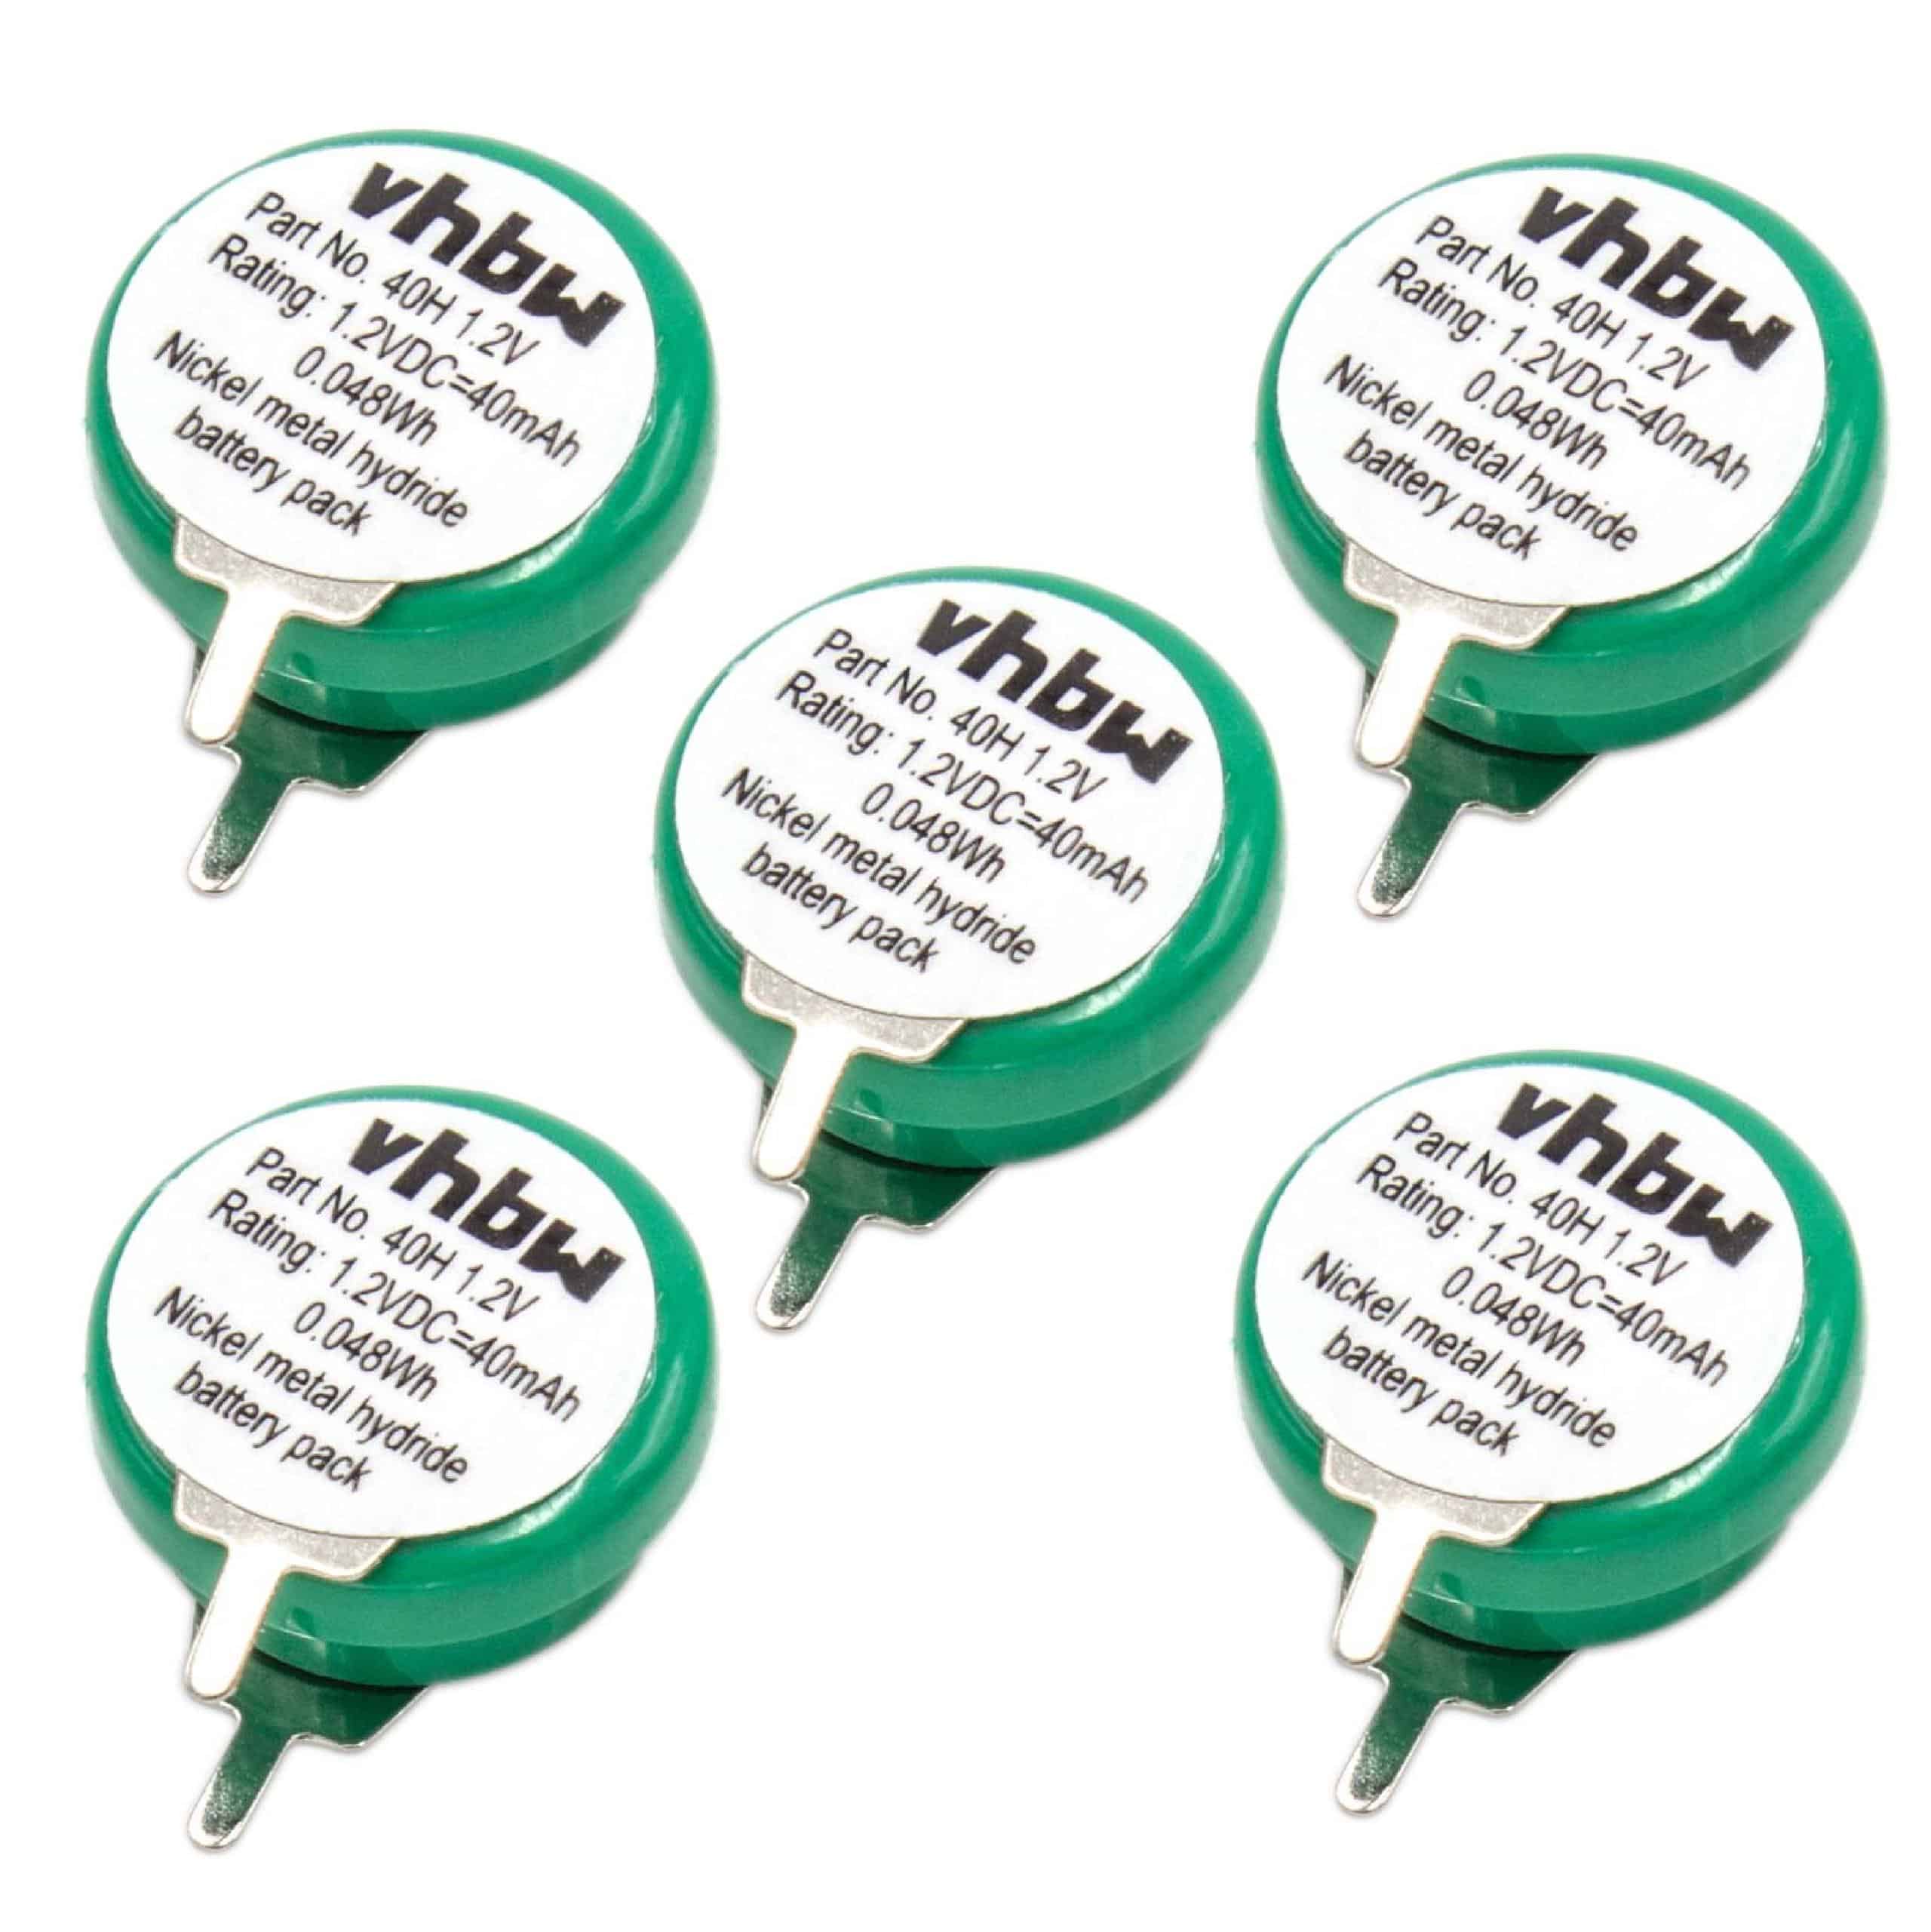 5x Button Cell Battery (1x Cell) Type 1/V40H 2 Pins for Model Building Solar Lamps etc. - 40mAh 1.2V NiMH